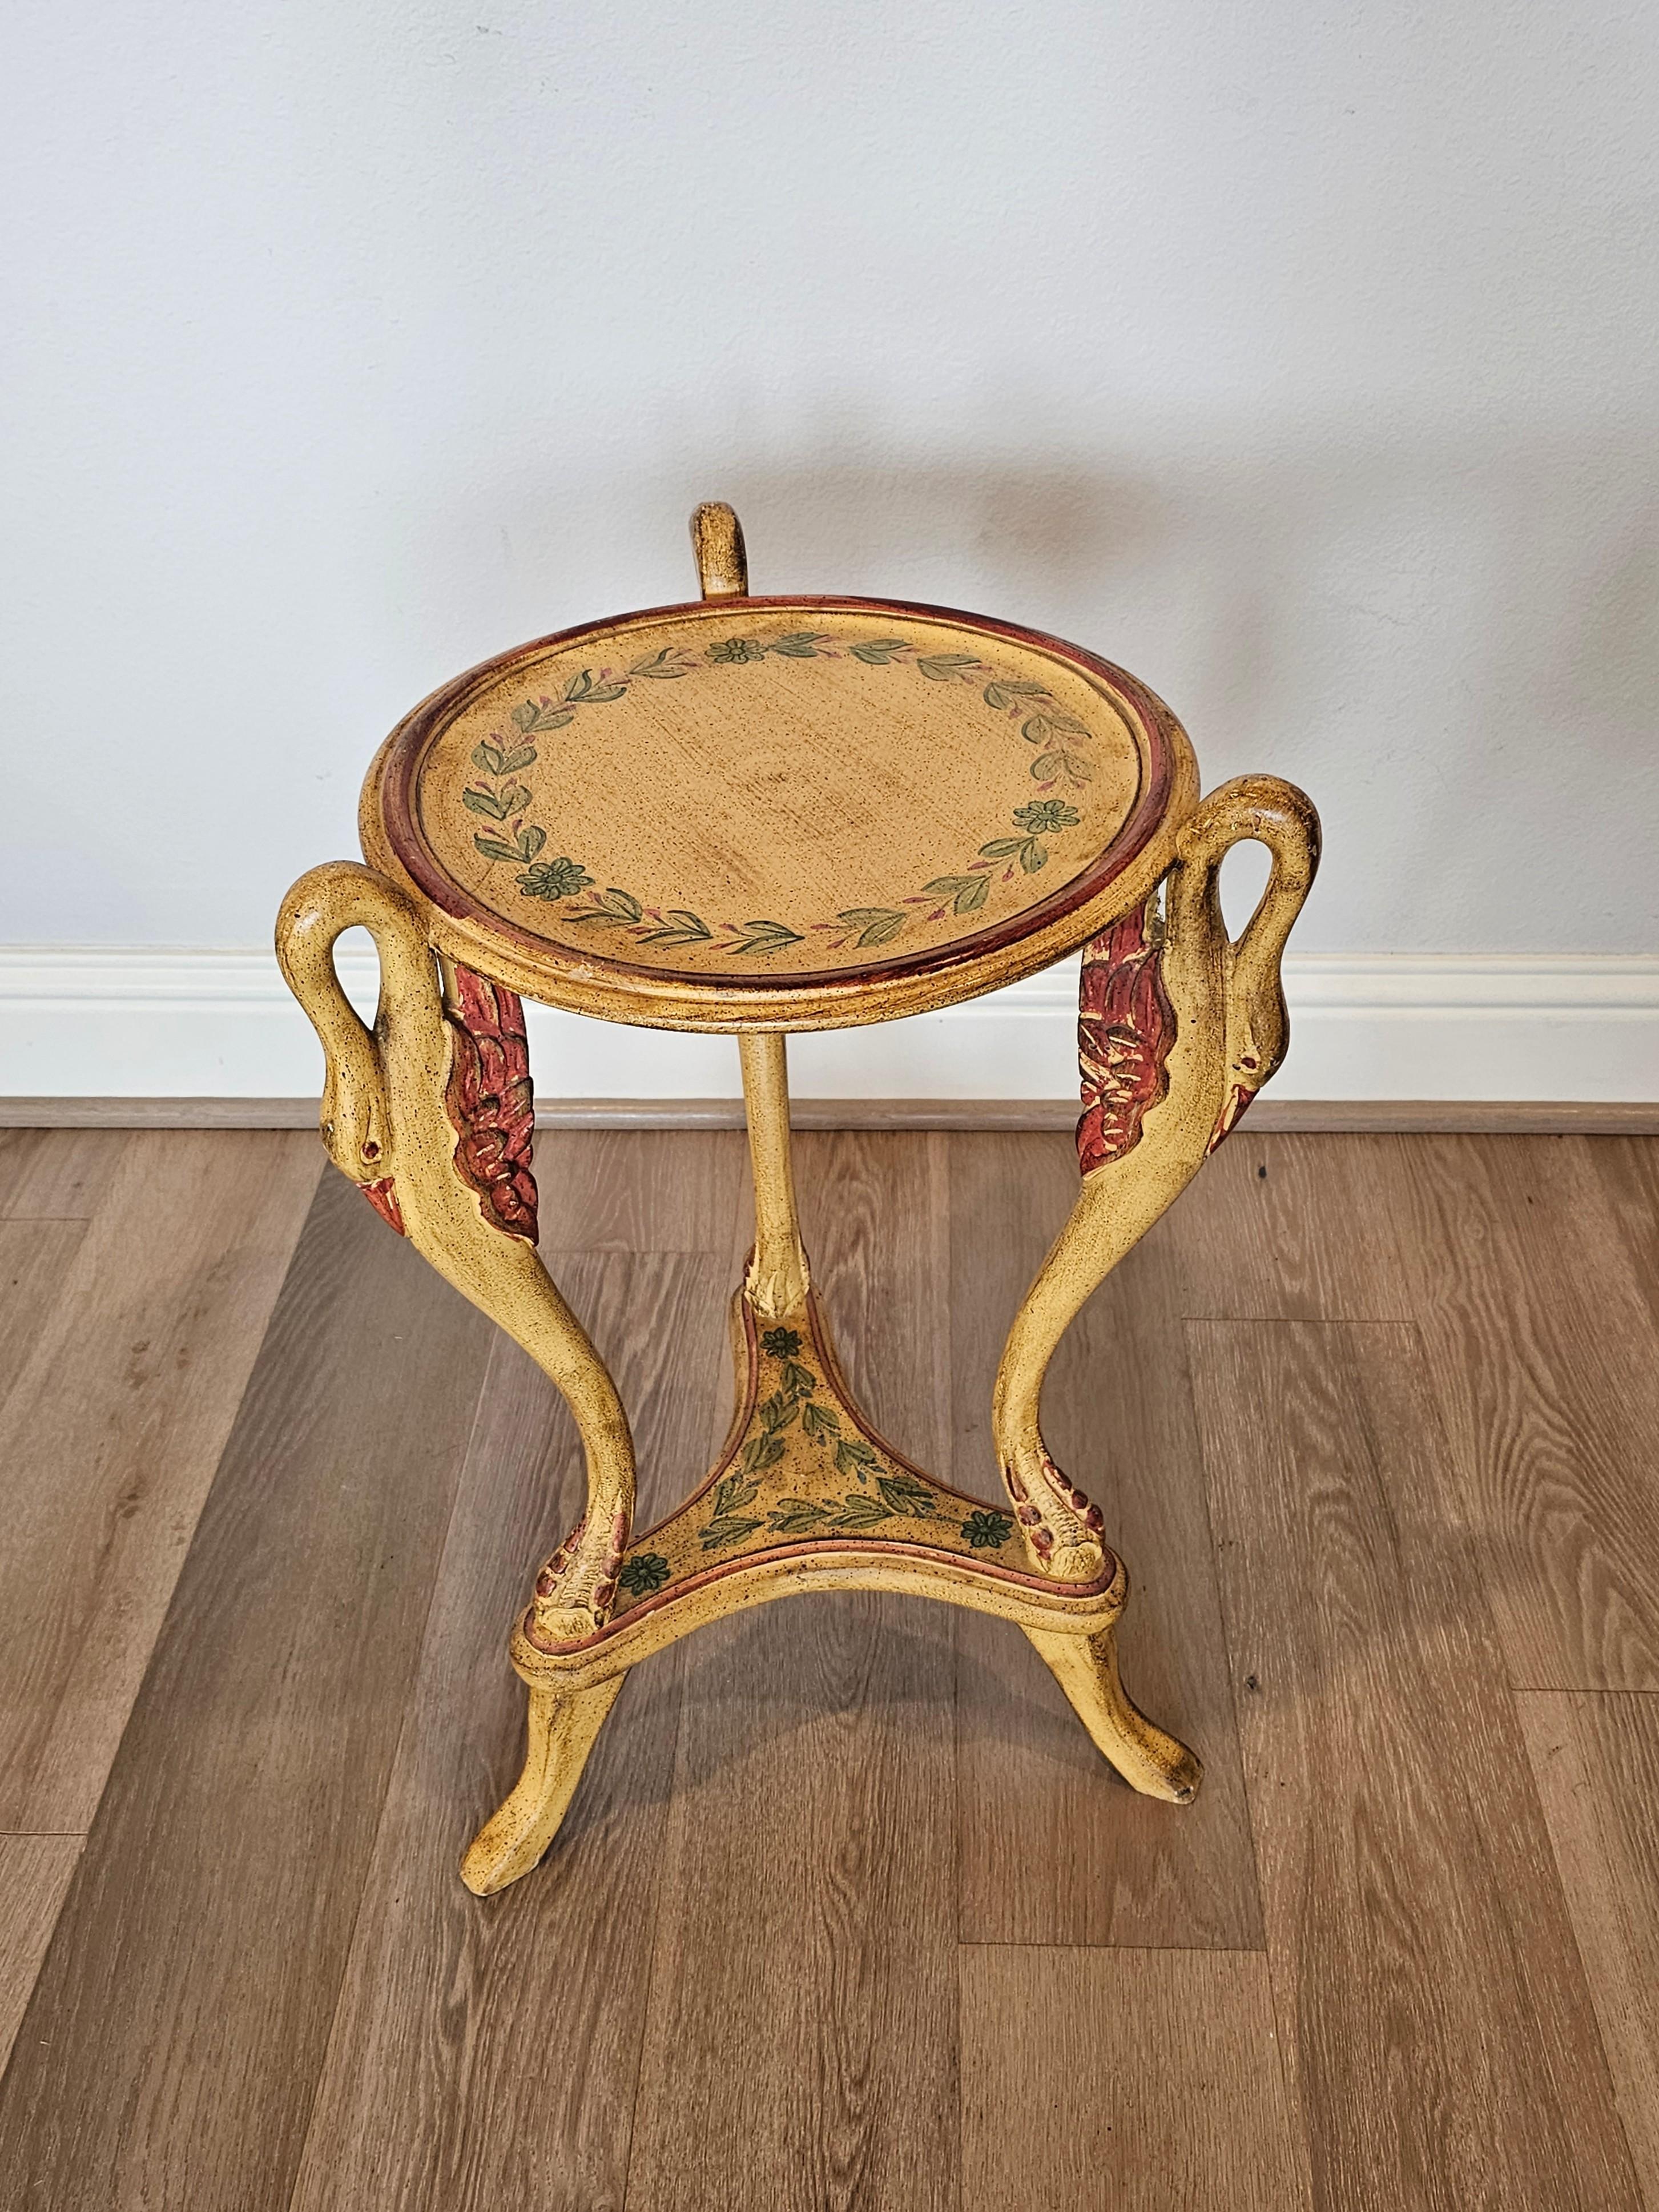 Vintage Neoclassical Revival Painted Swan Guéridon Table In Fair Condition For Sale In Forney, TX